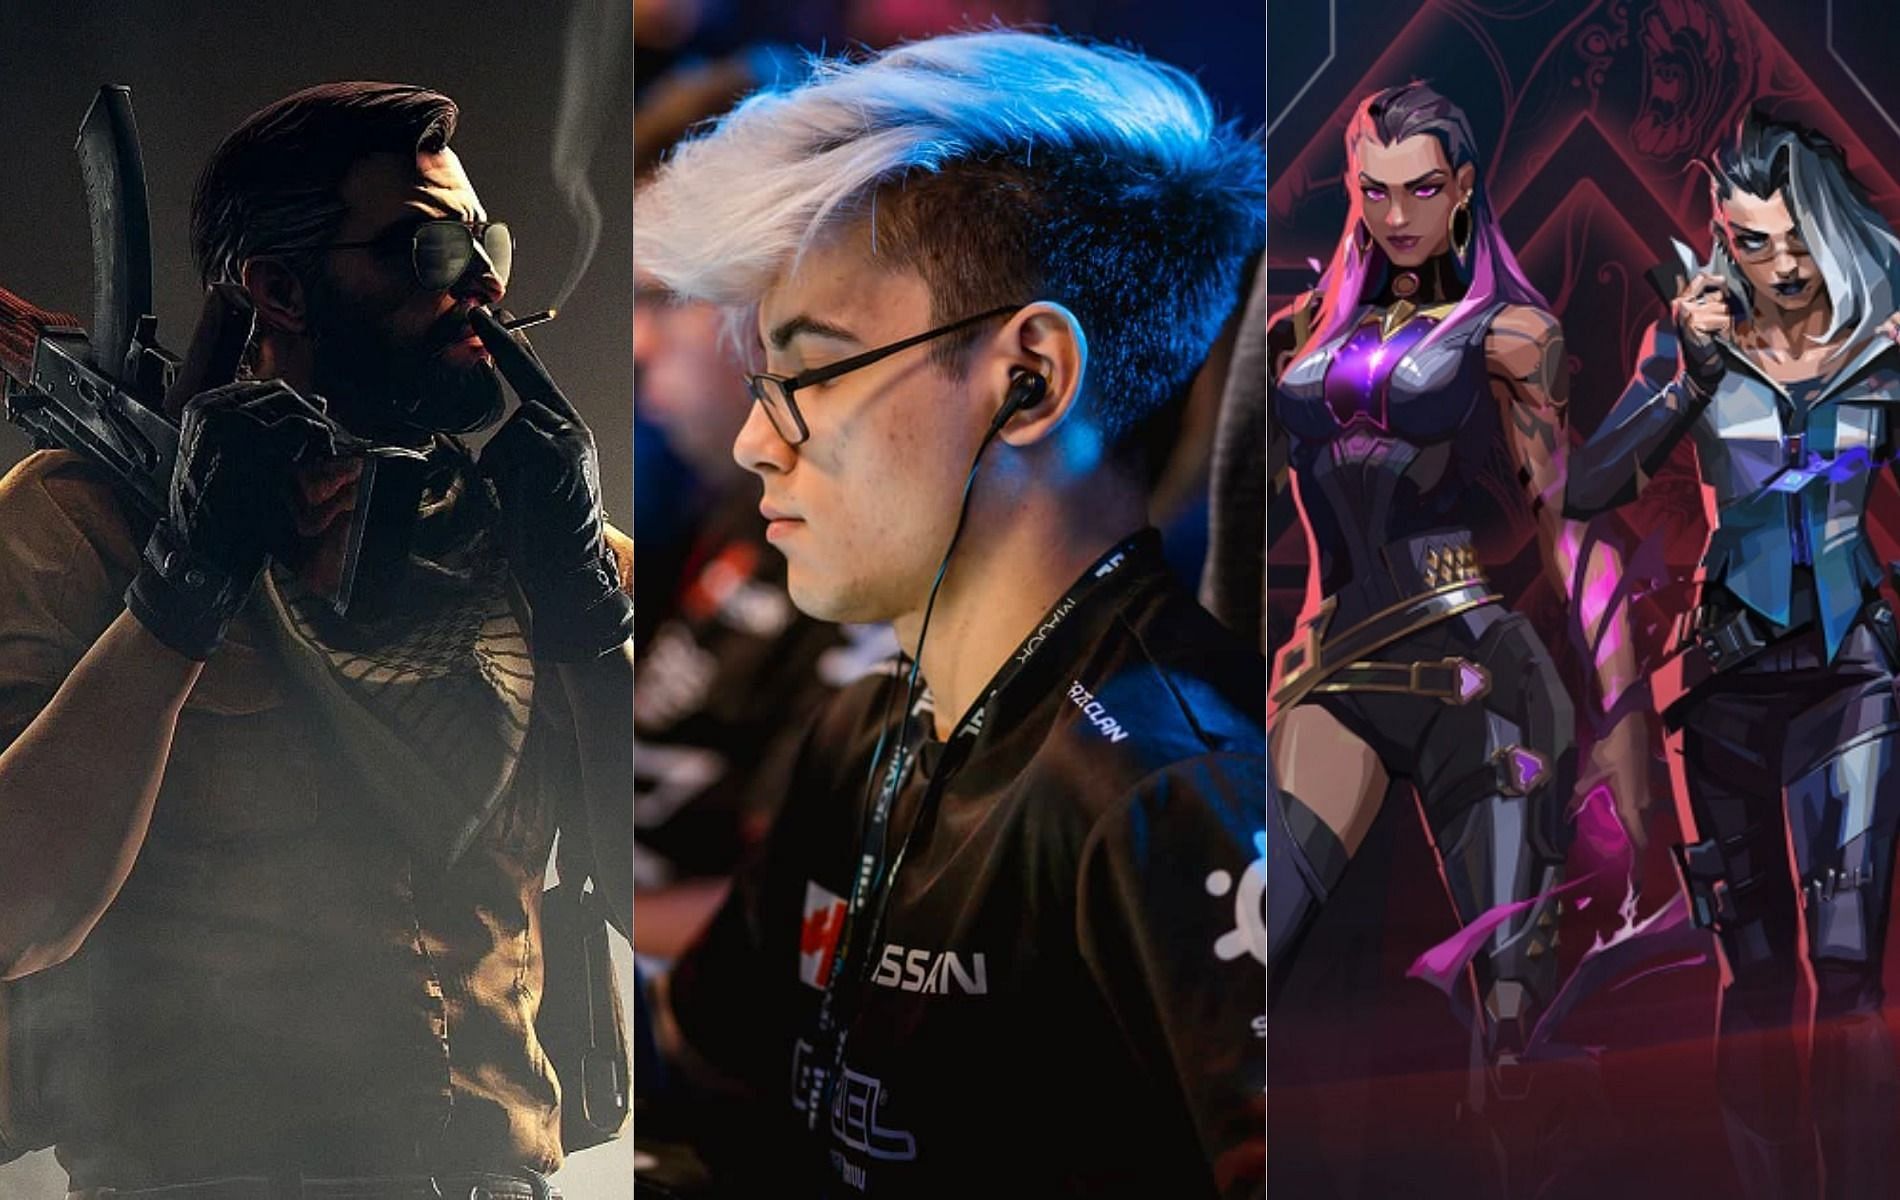 Twistzz opens up about the abysmal state of North American CS:GO (Images via Valve, FaZe Clan, and Valorant)